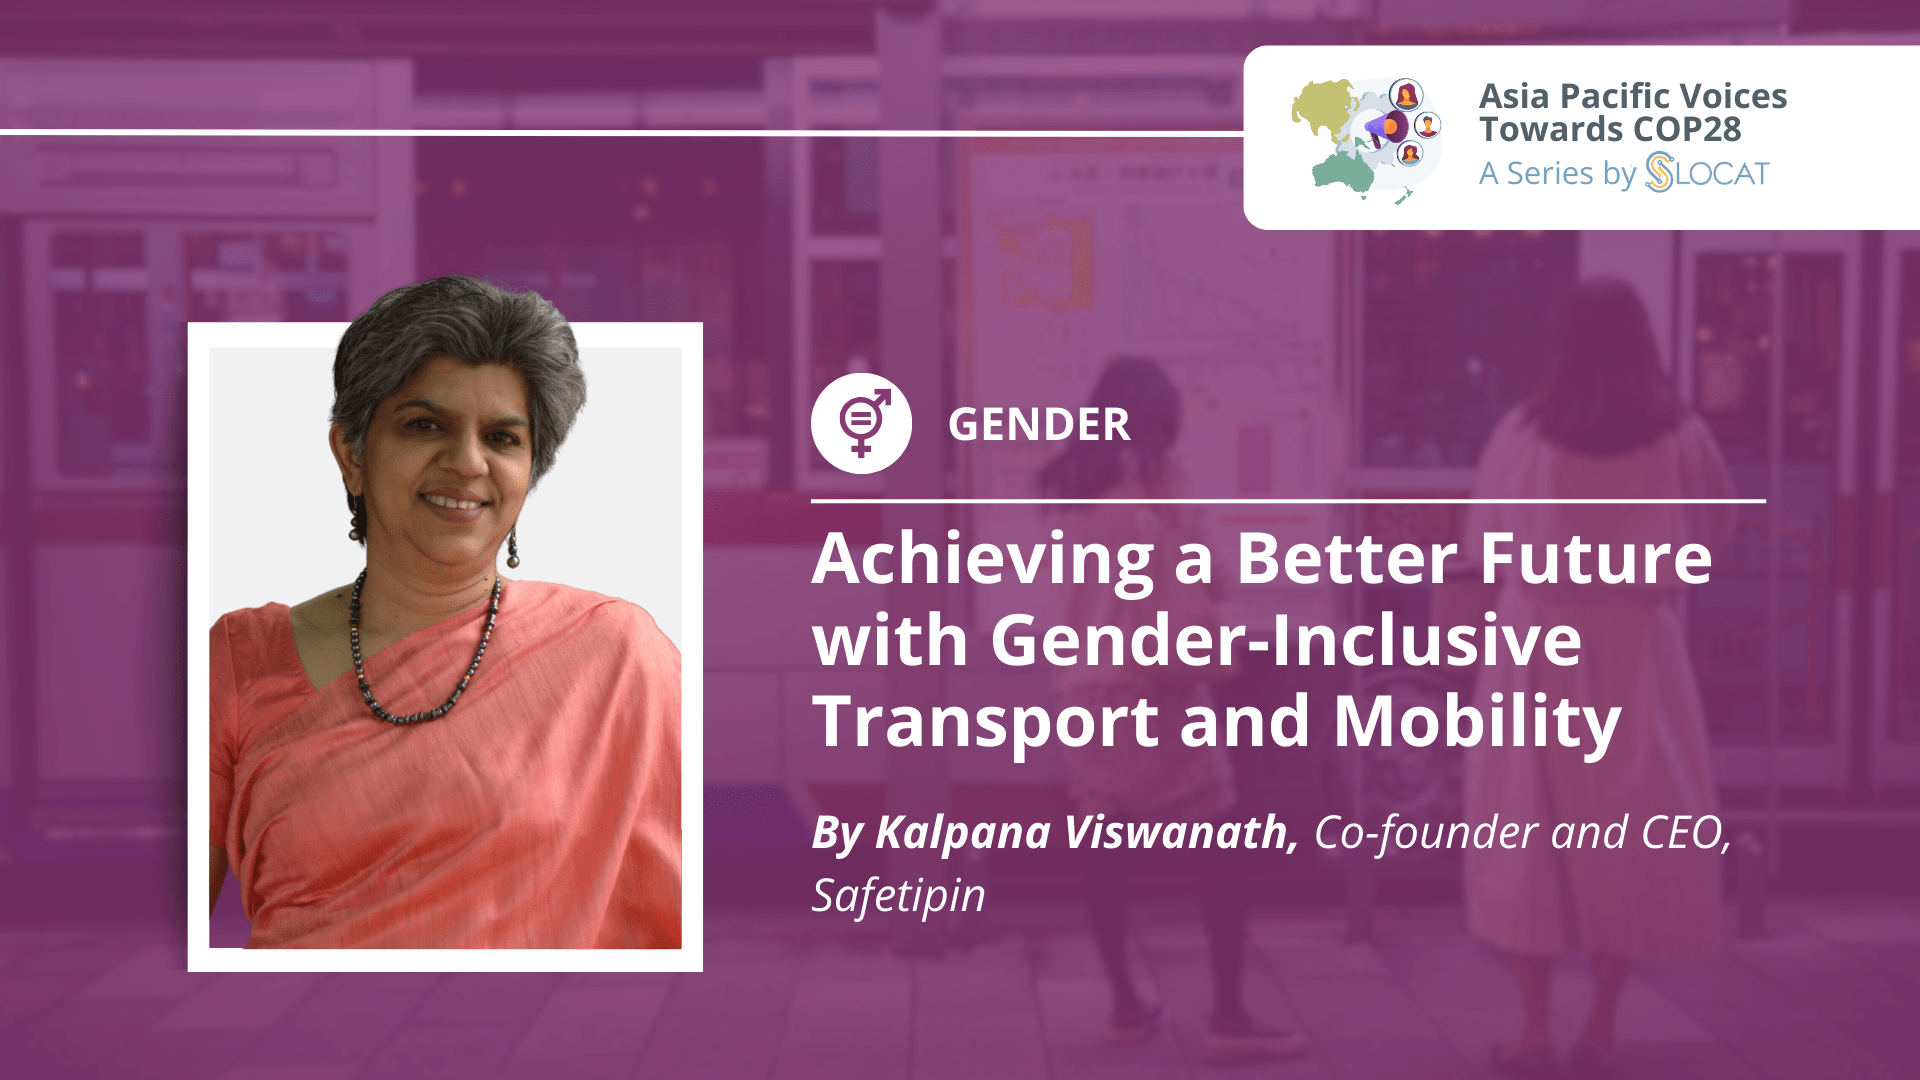 Achieving a Better Future with Gender-Inclusive Transport and Mobility